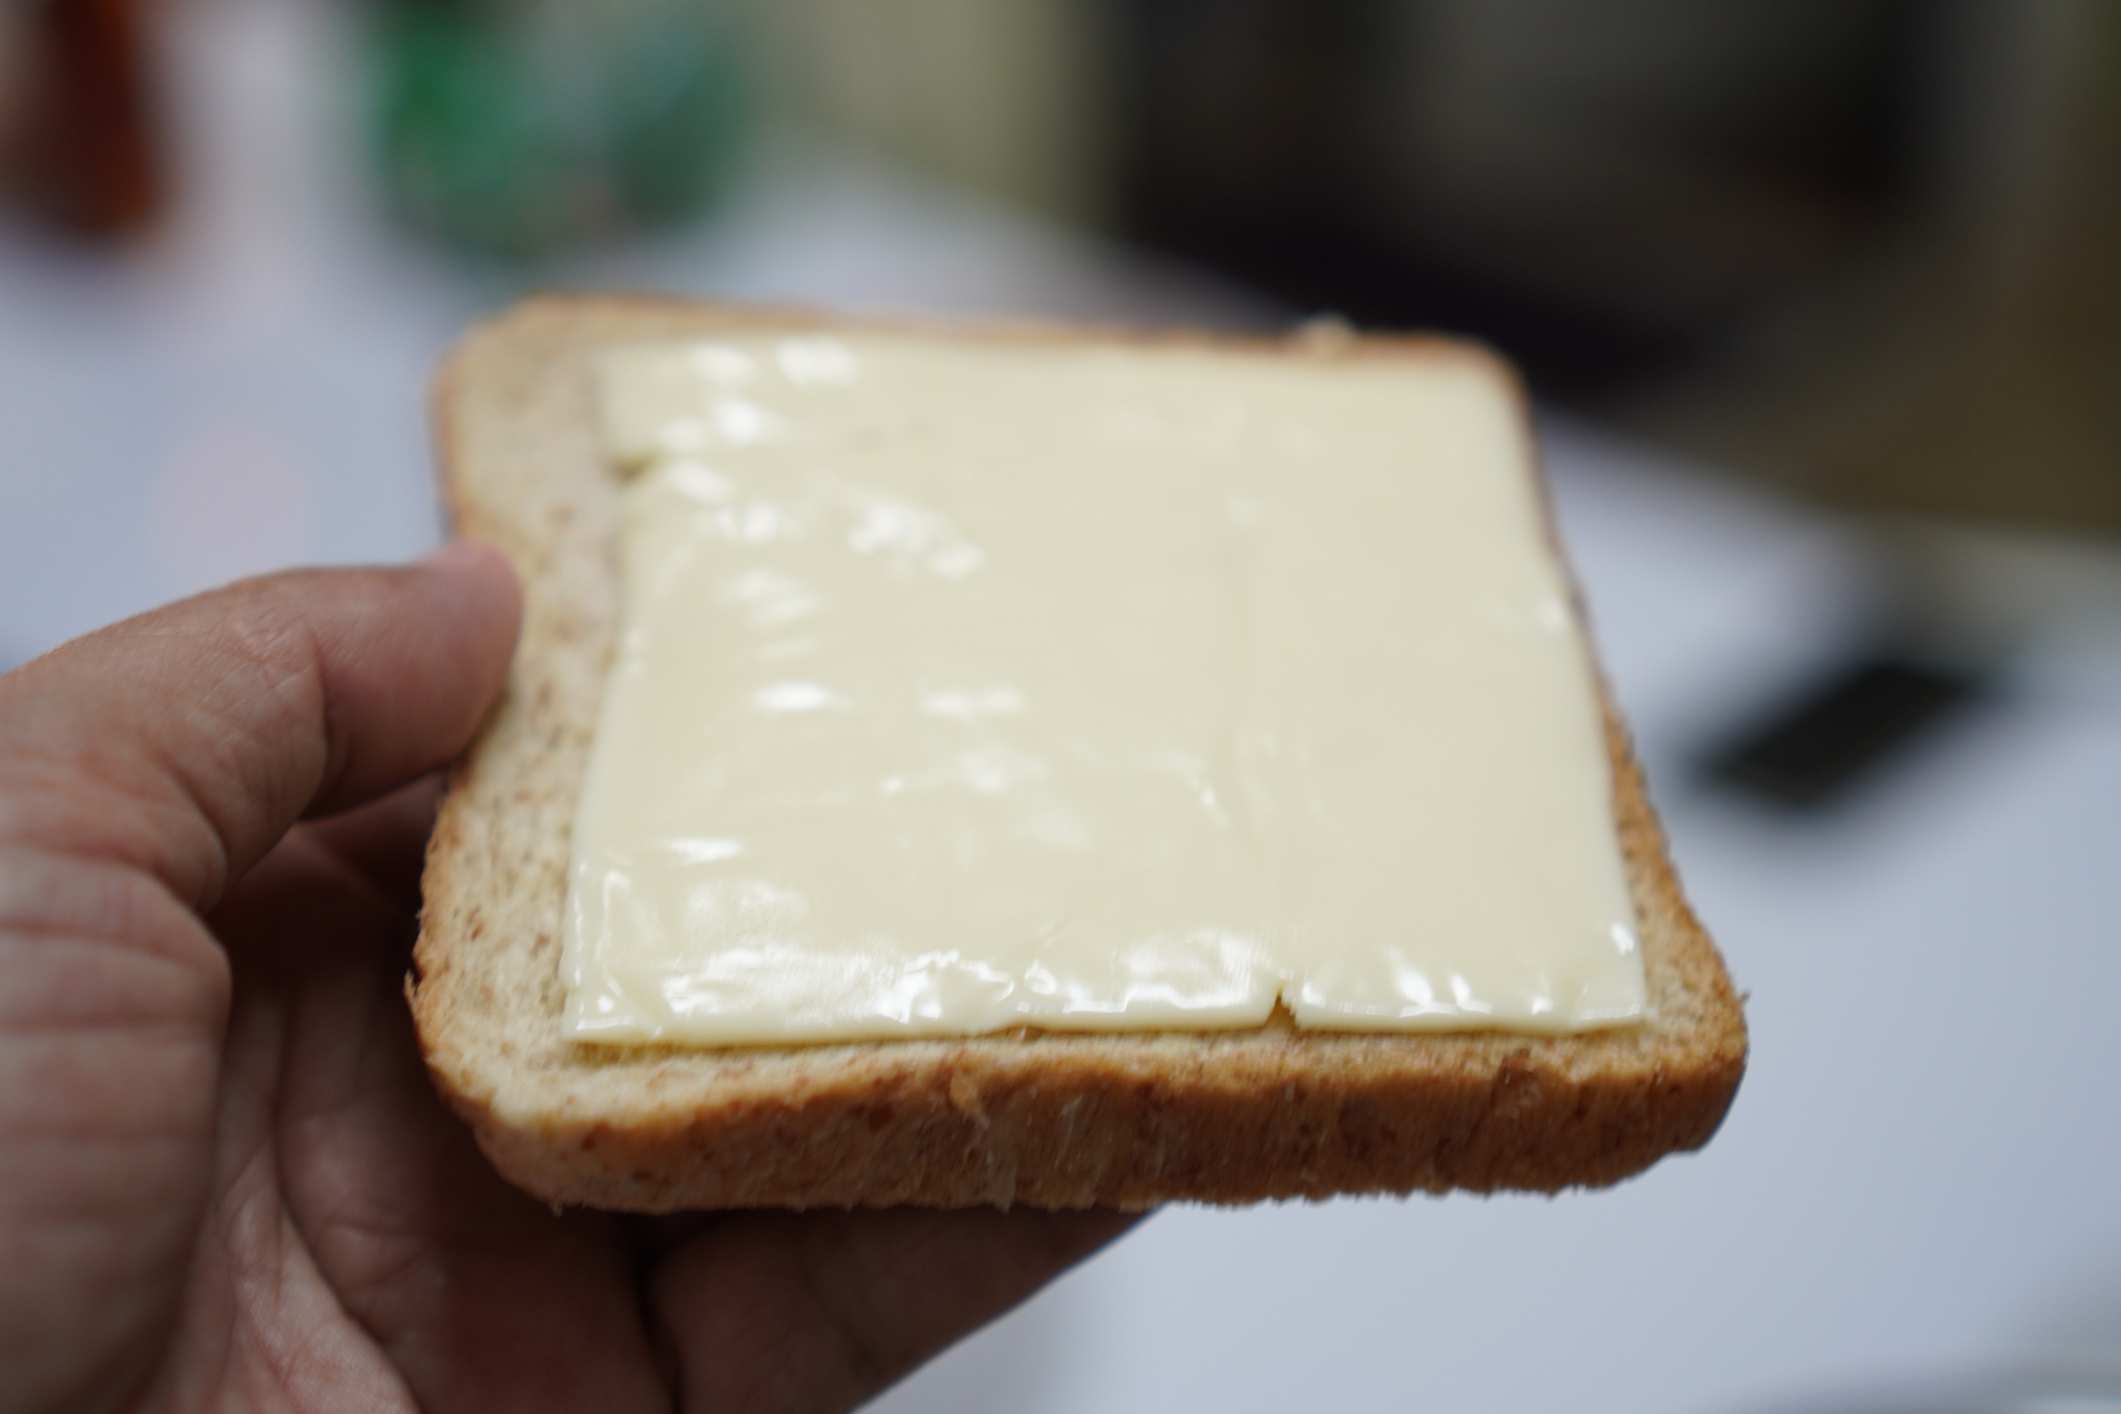 Hand holding a slice of bread with a spread, possibly butter or cheese